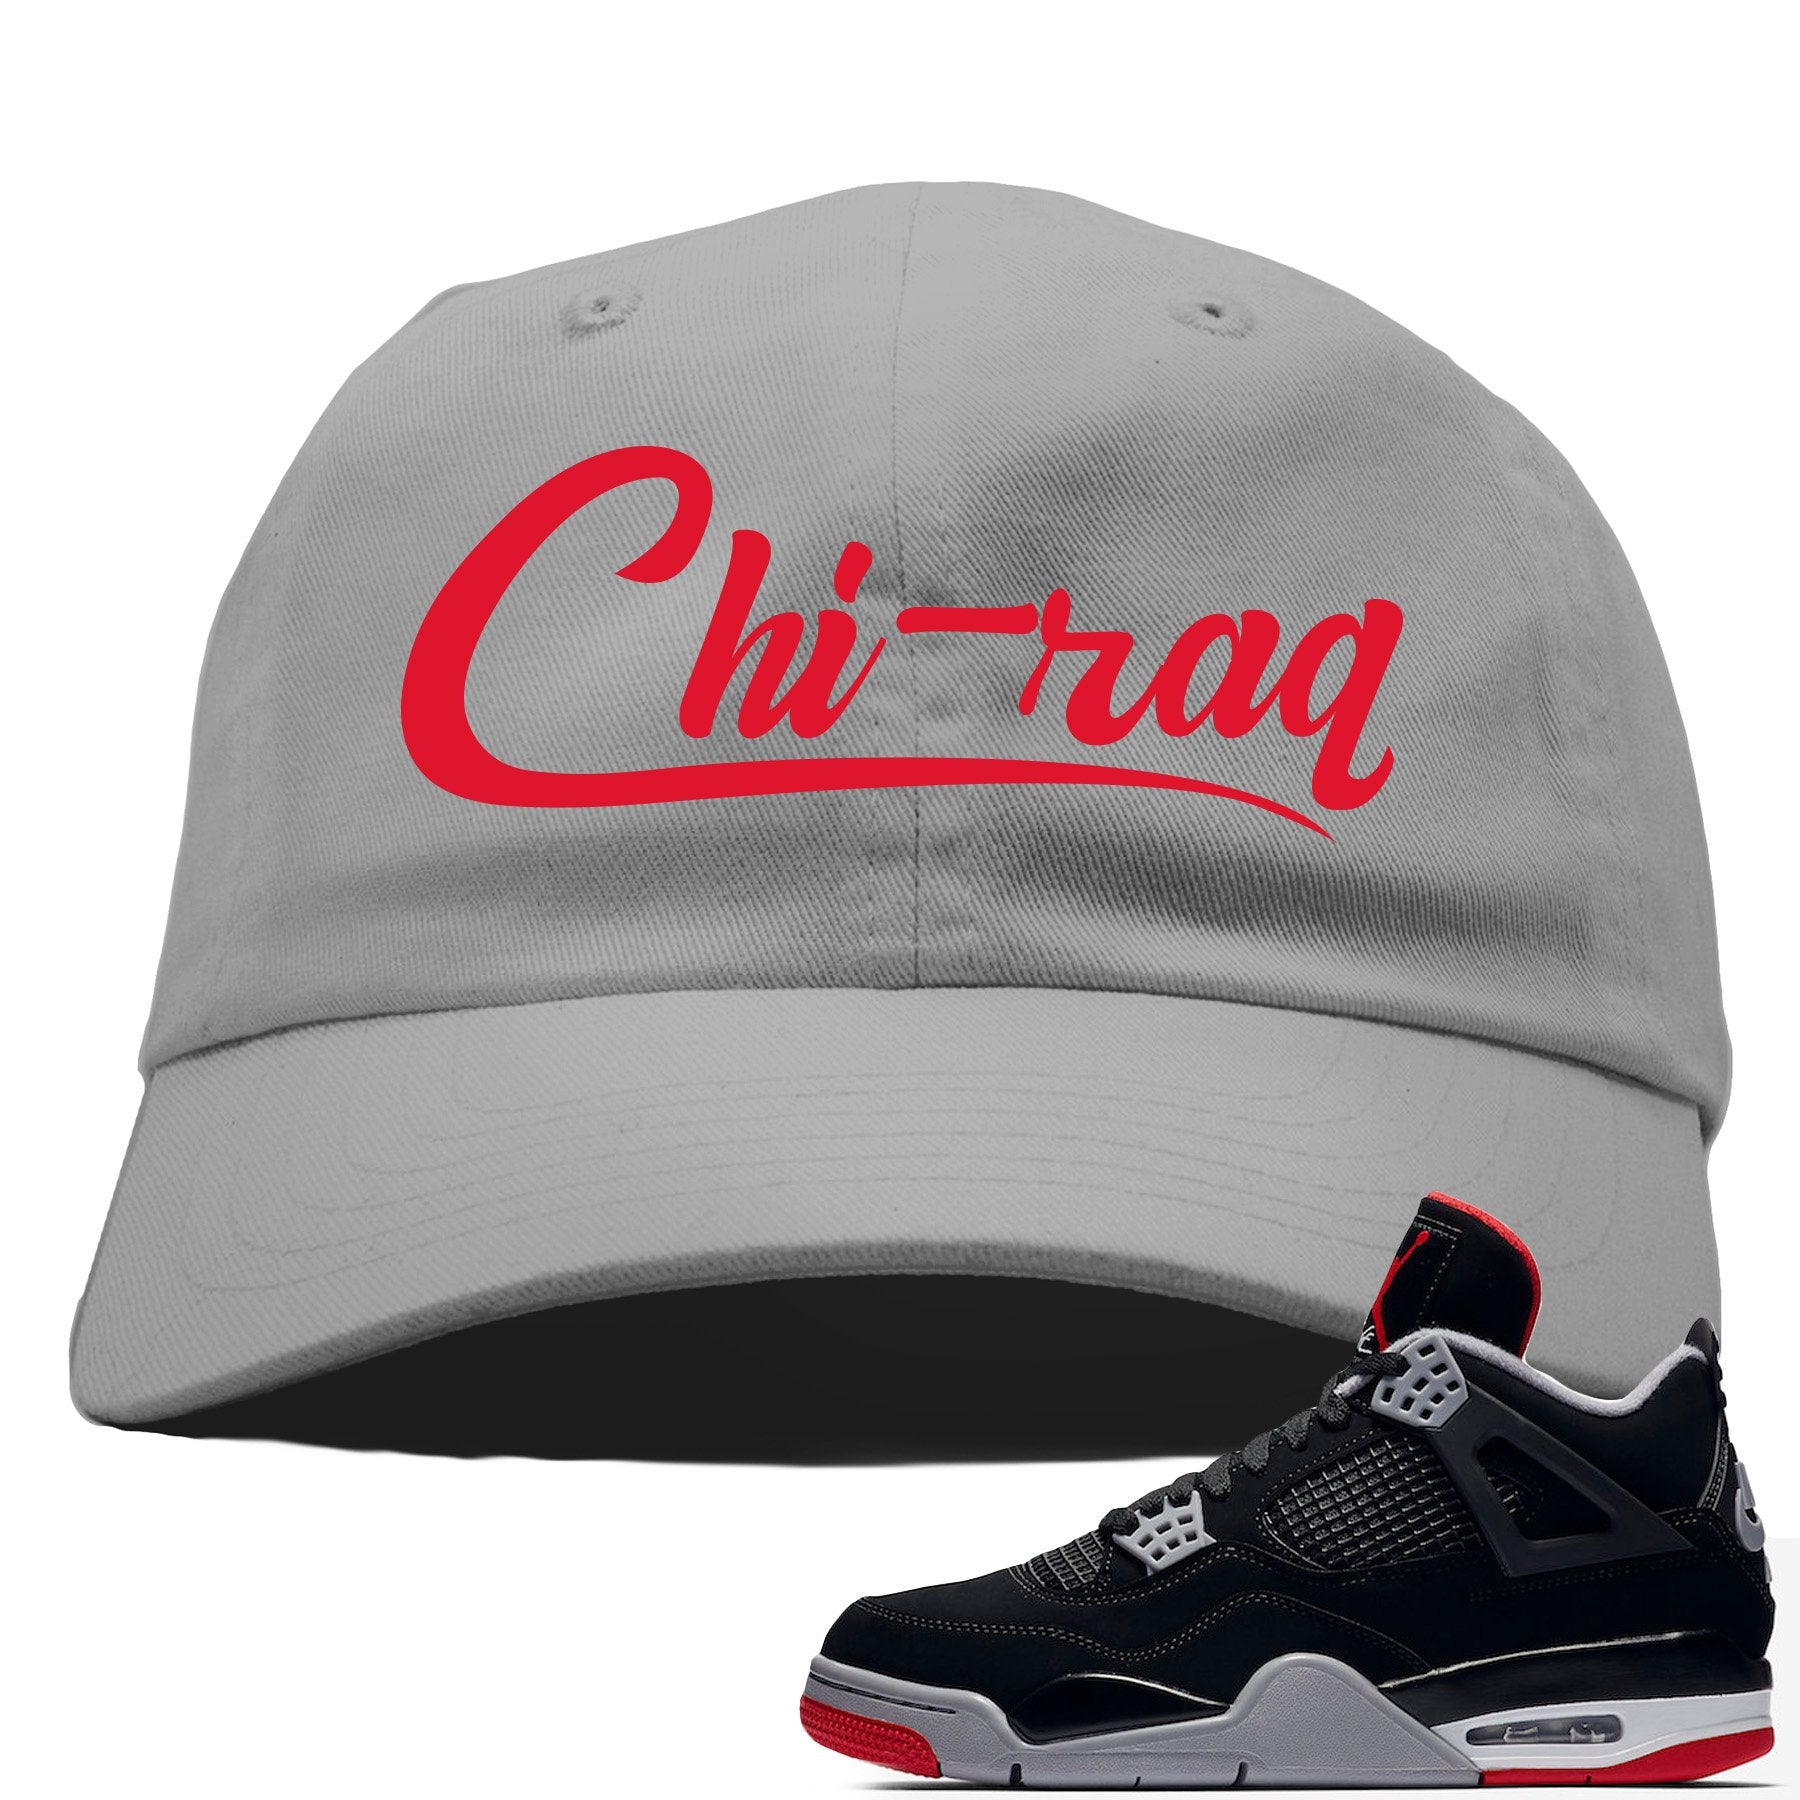 This grey and red hat will match great with your Air Jordan 4 Bred shoes